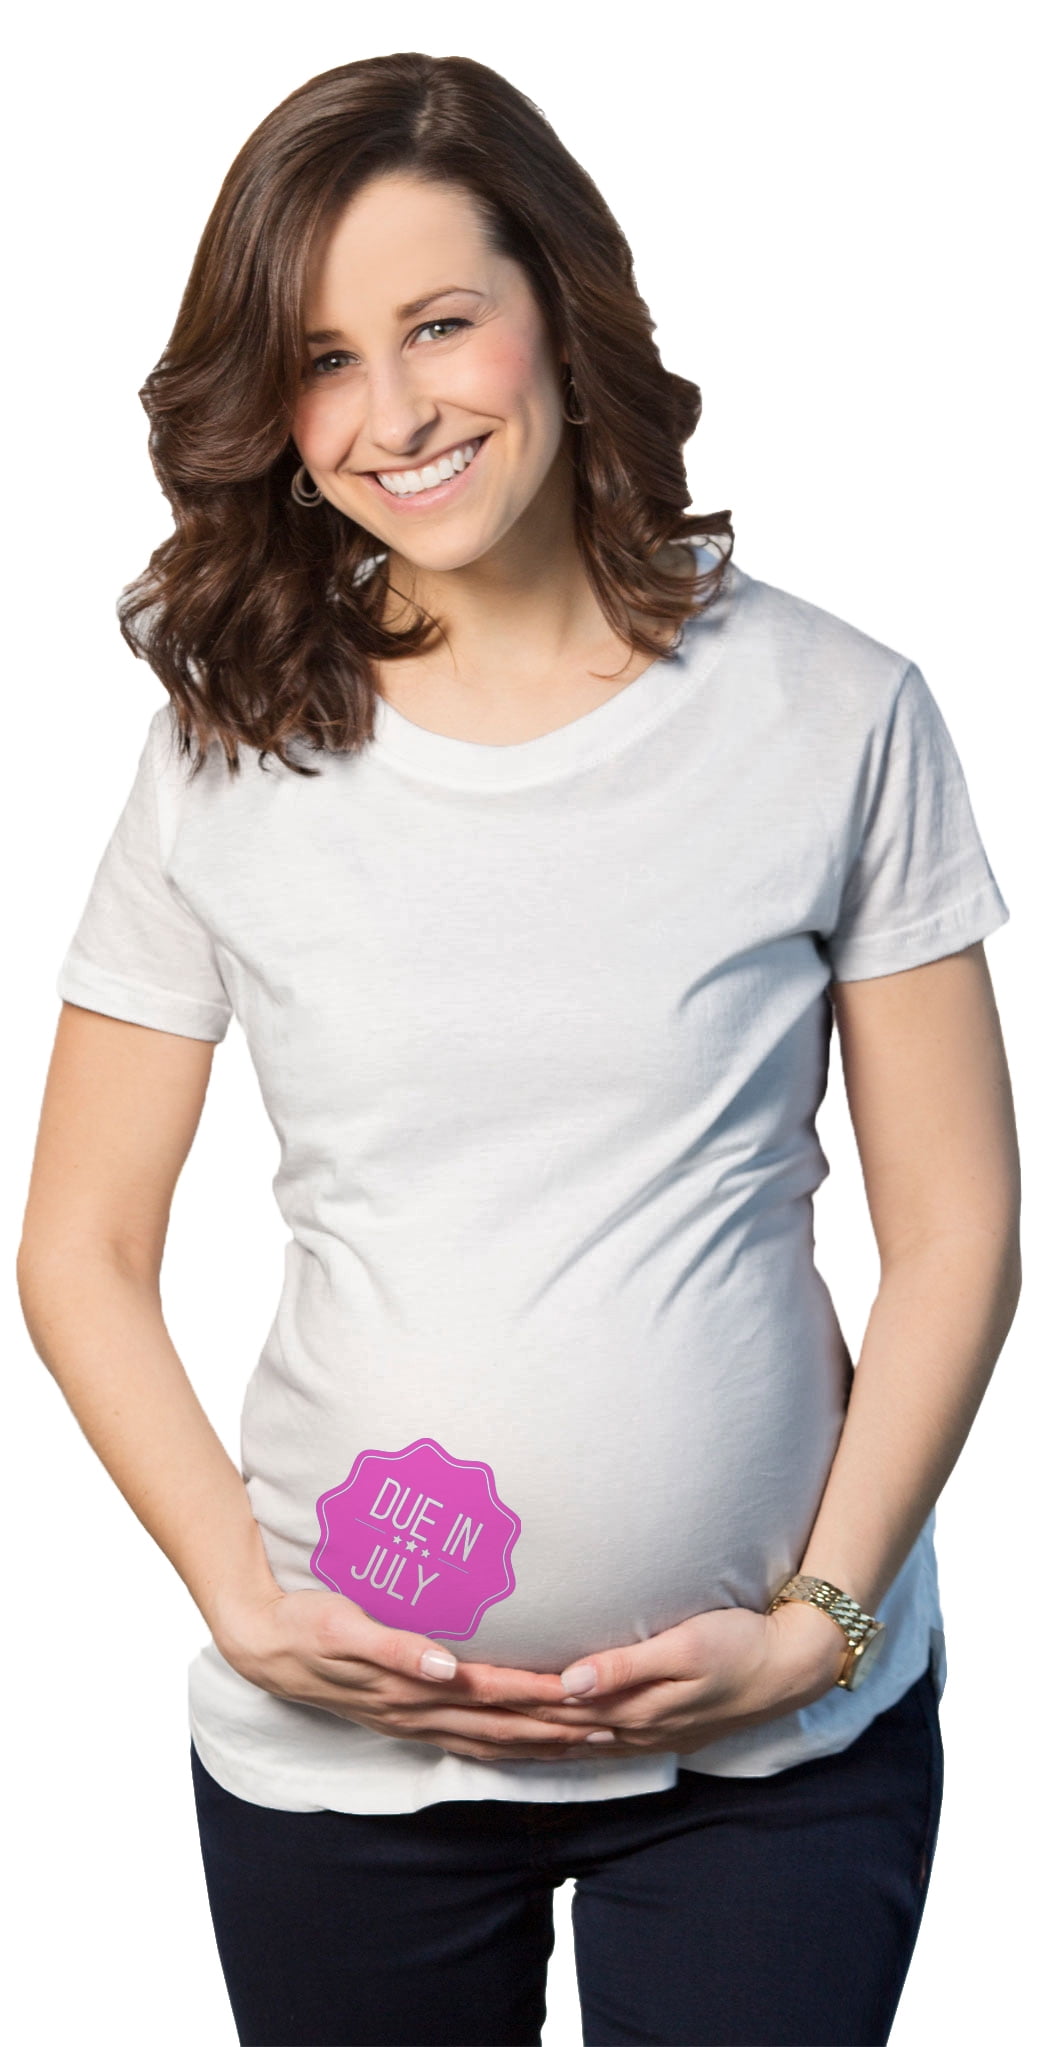 Crazy Dog TShirts   Women's Baby GIRL Due In JULY Maternity Shirt Cool Pregnancy Tee   whites